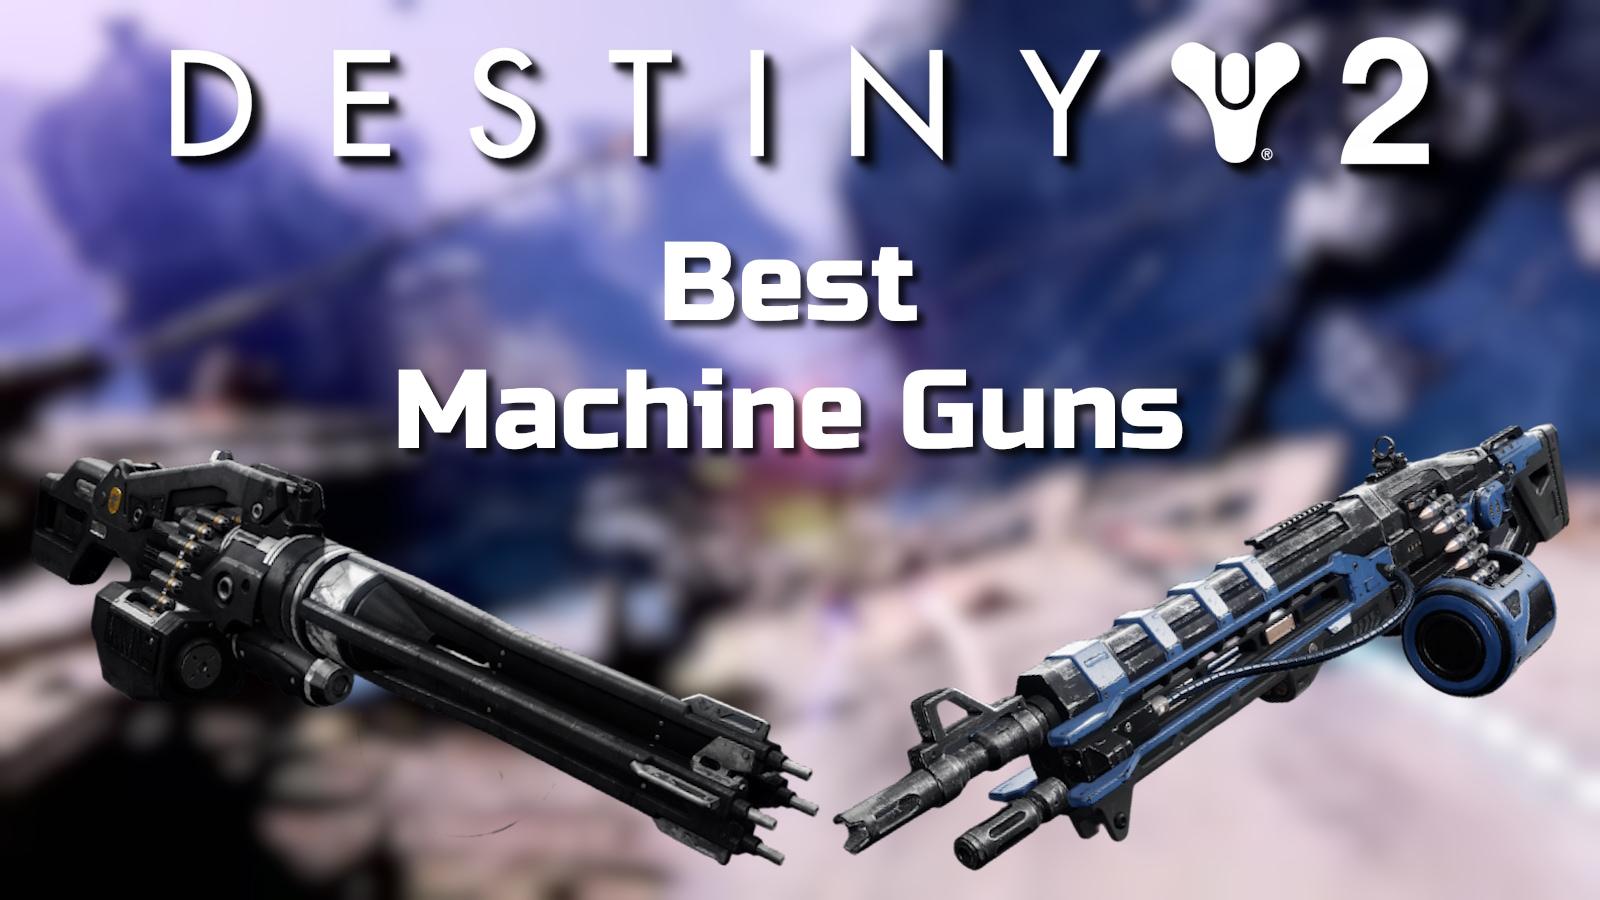 Best machine guns in destiny 2 with heir apparent and thunderlord exotic lmgs.